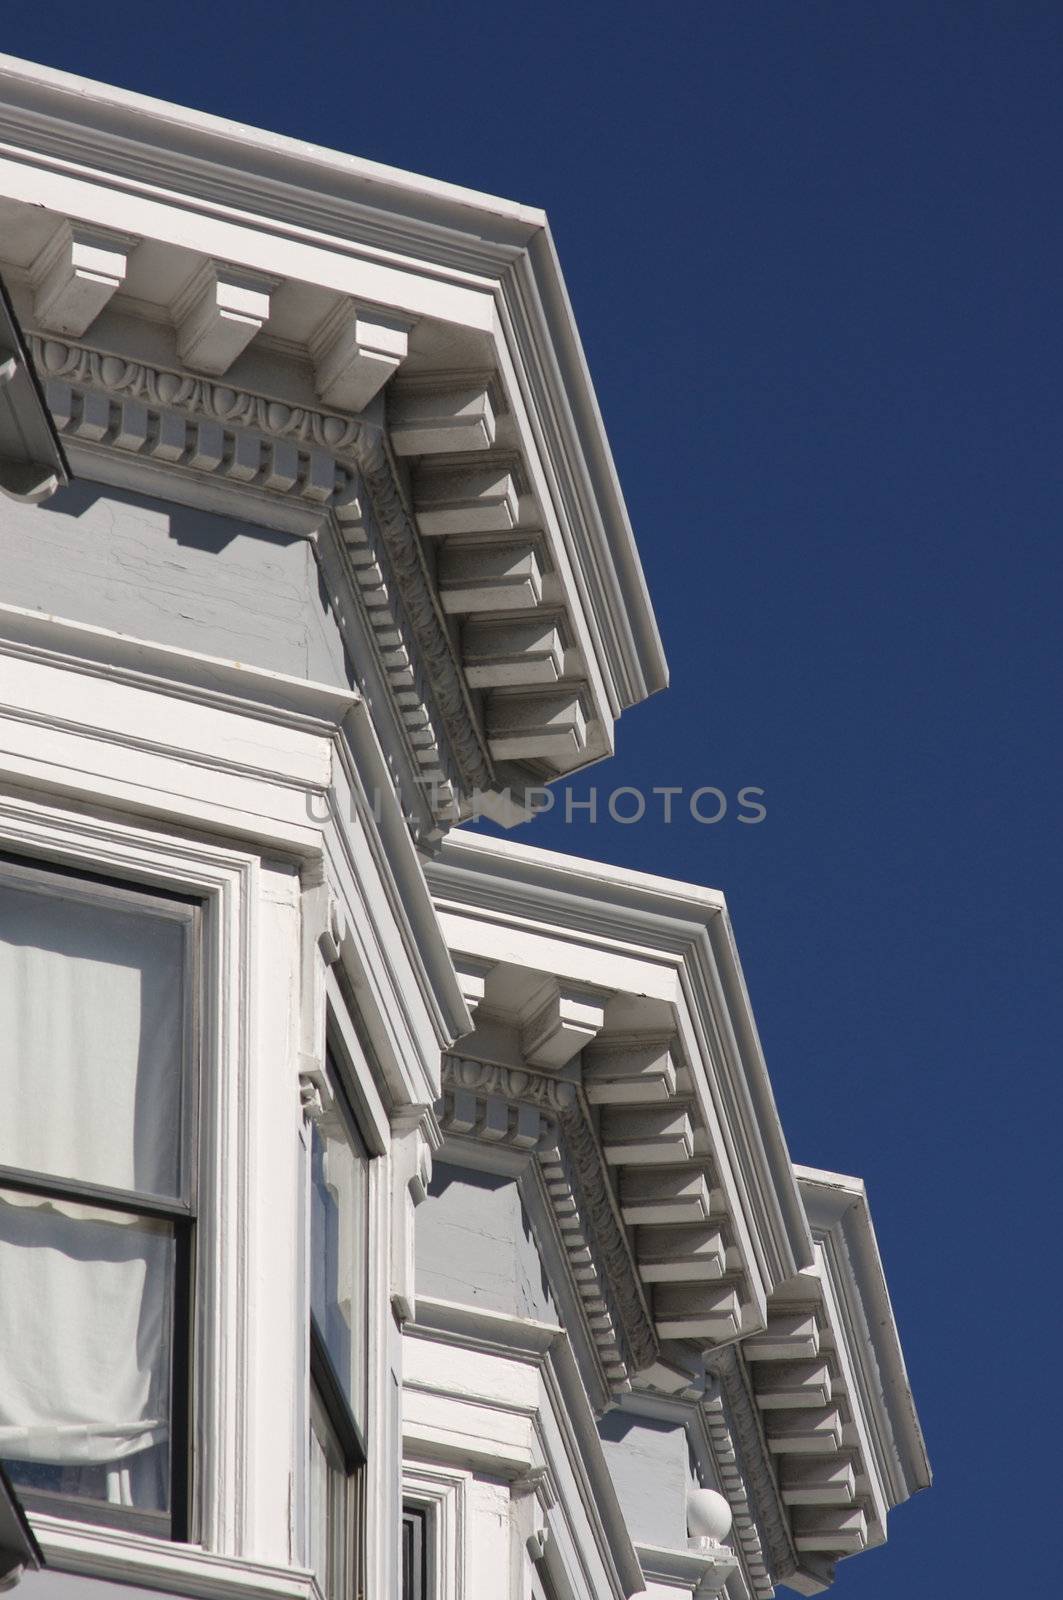 Victorian Home Details by Feverpitched